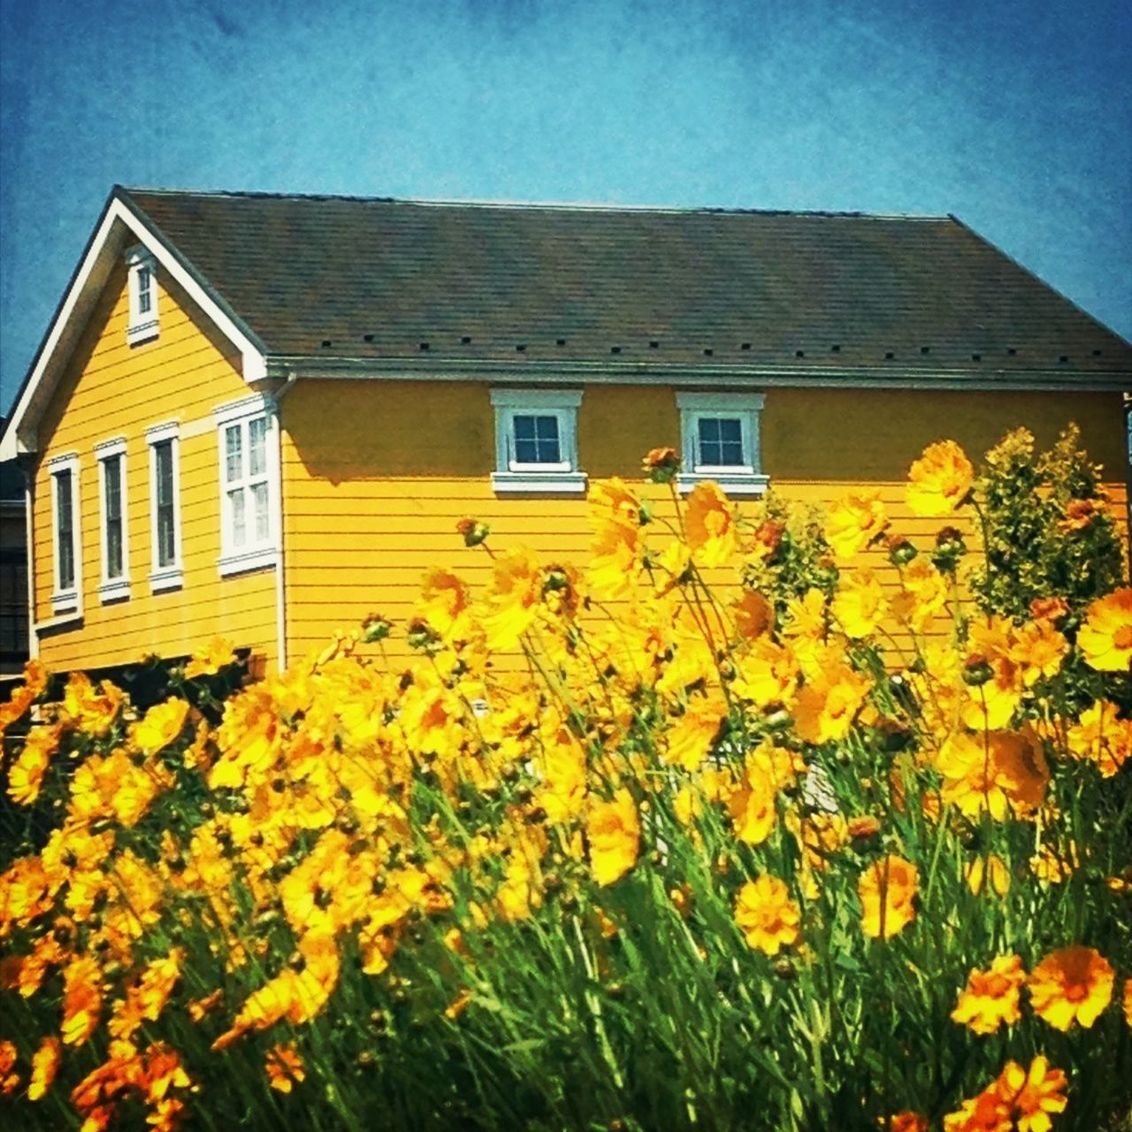 building exterior, architecture, flower, yellow, built structure, house, growth, freshness, plant, sky, fragility, window, residential structure, sunflower, residential building, nature, beauty in nature, outdoors, low angle view, day